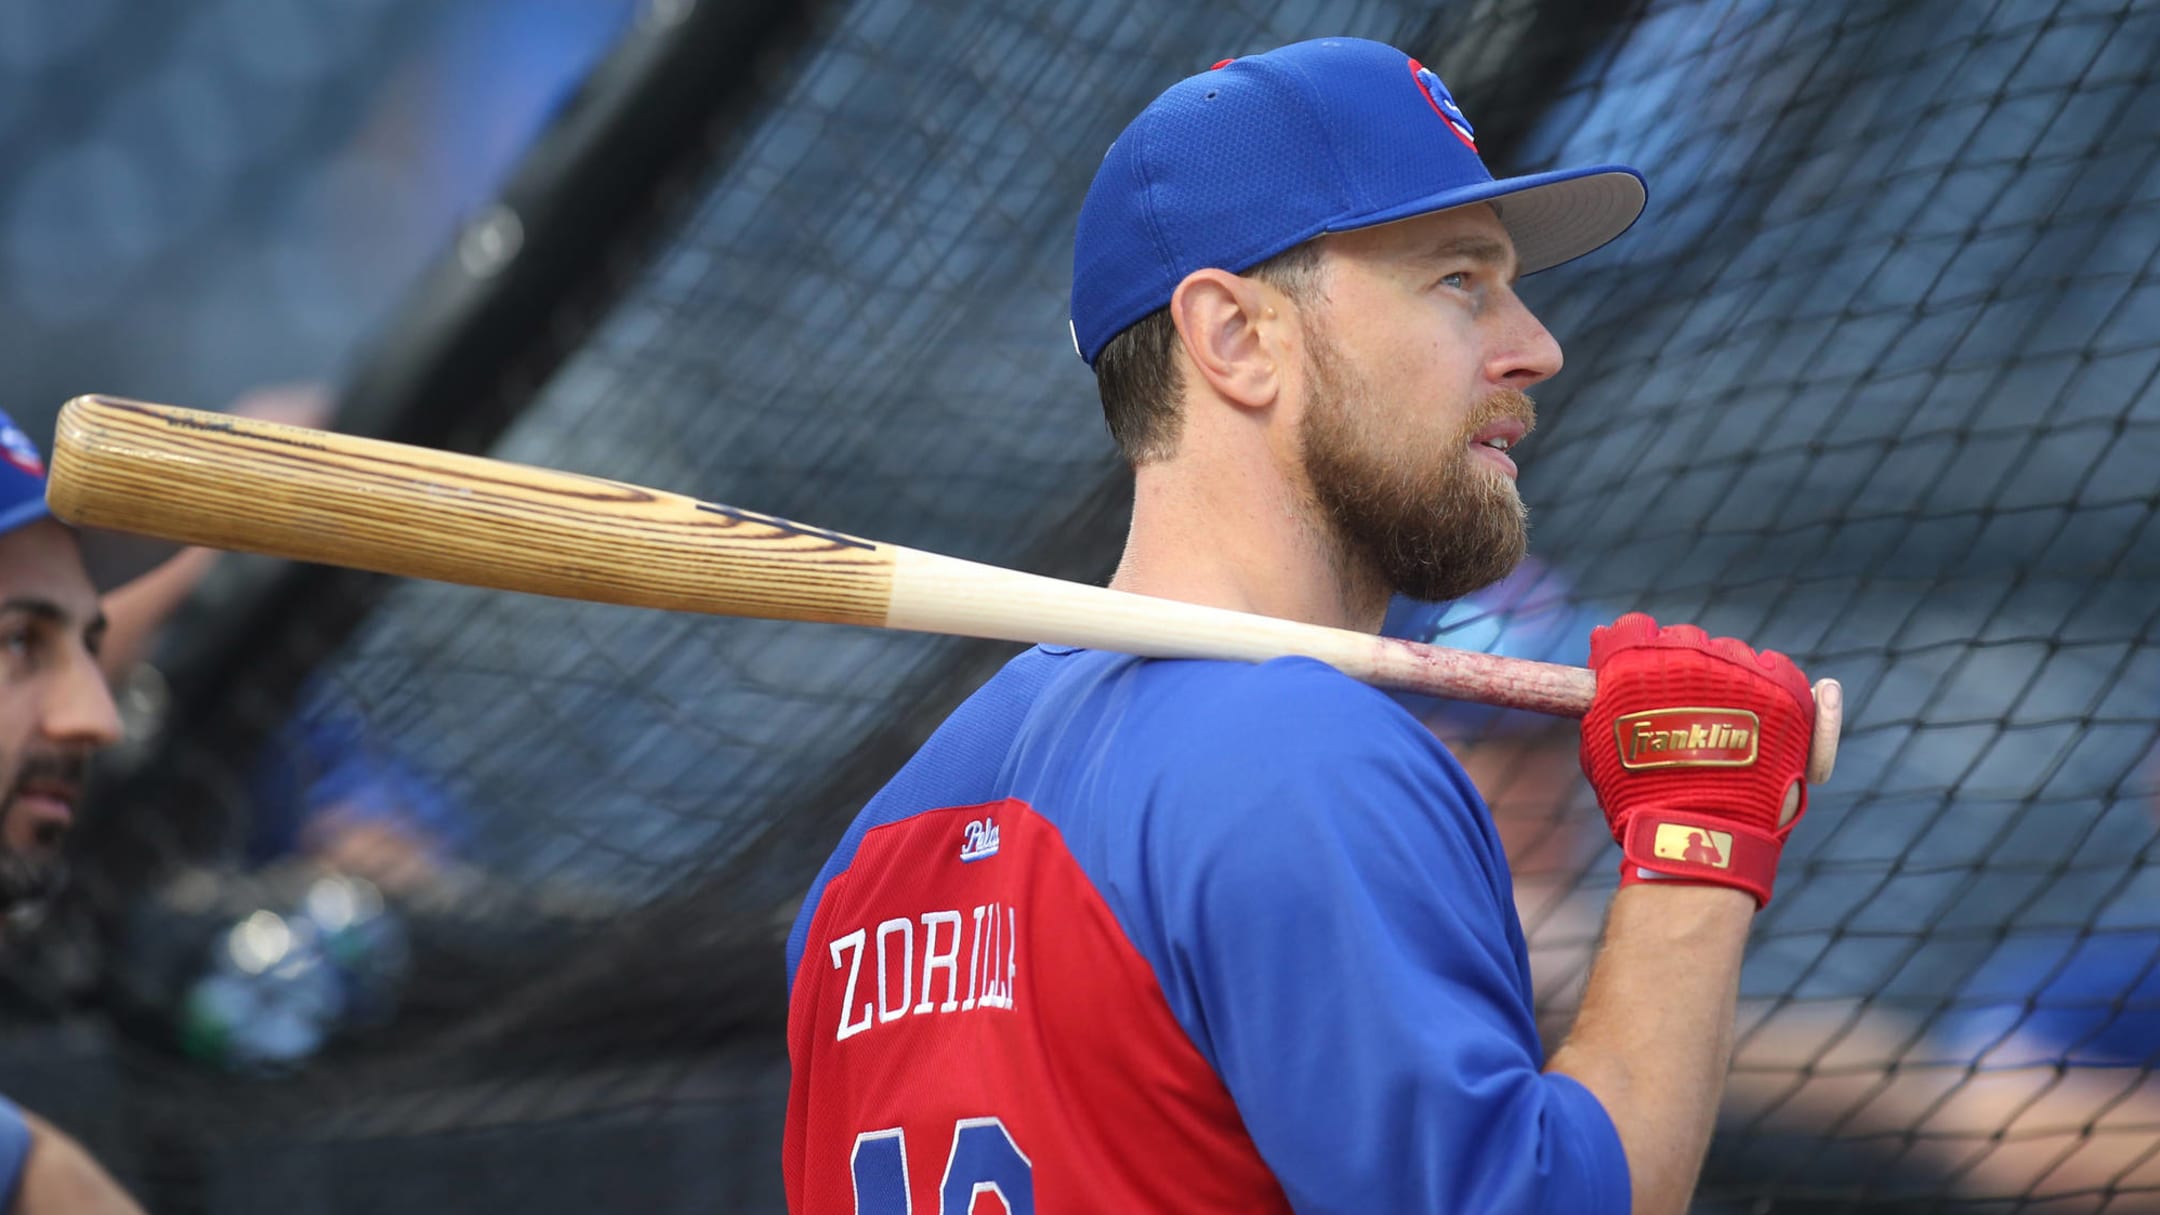 Zobrist's 2016 Cubs World Series ring going up for auction